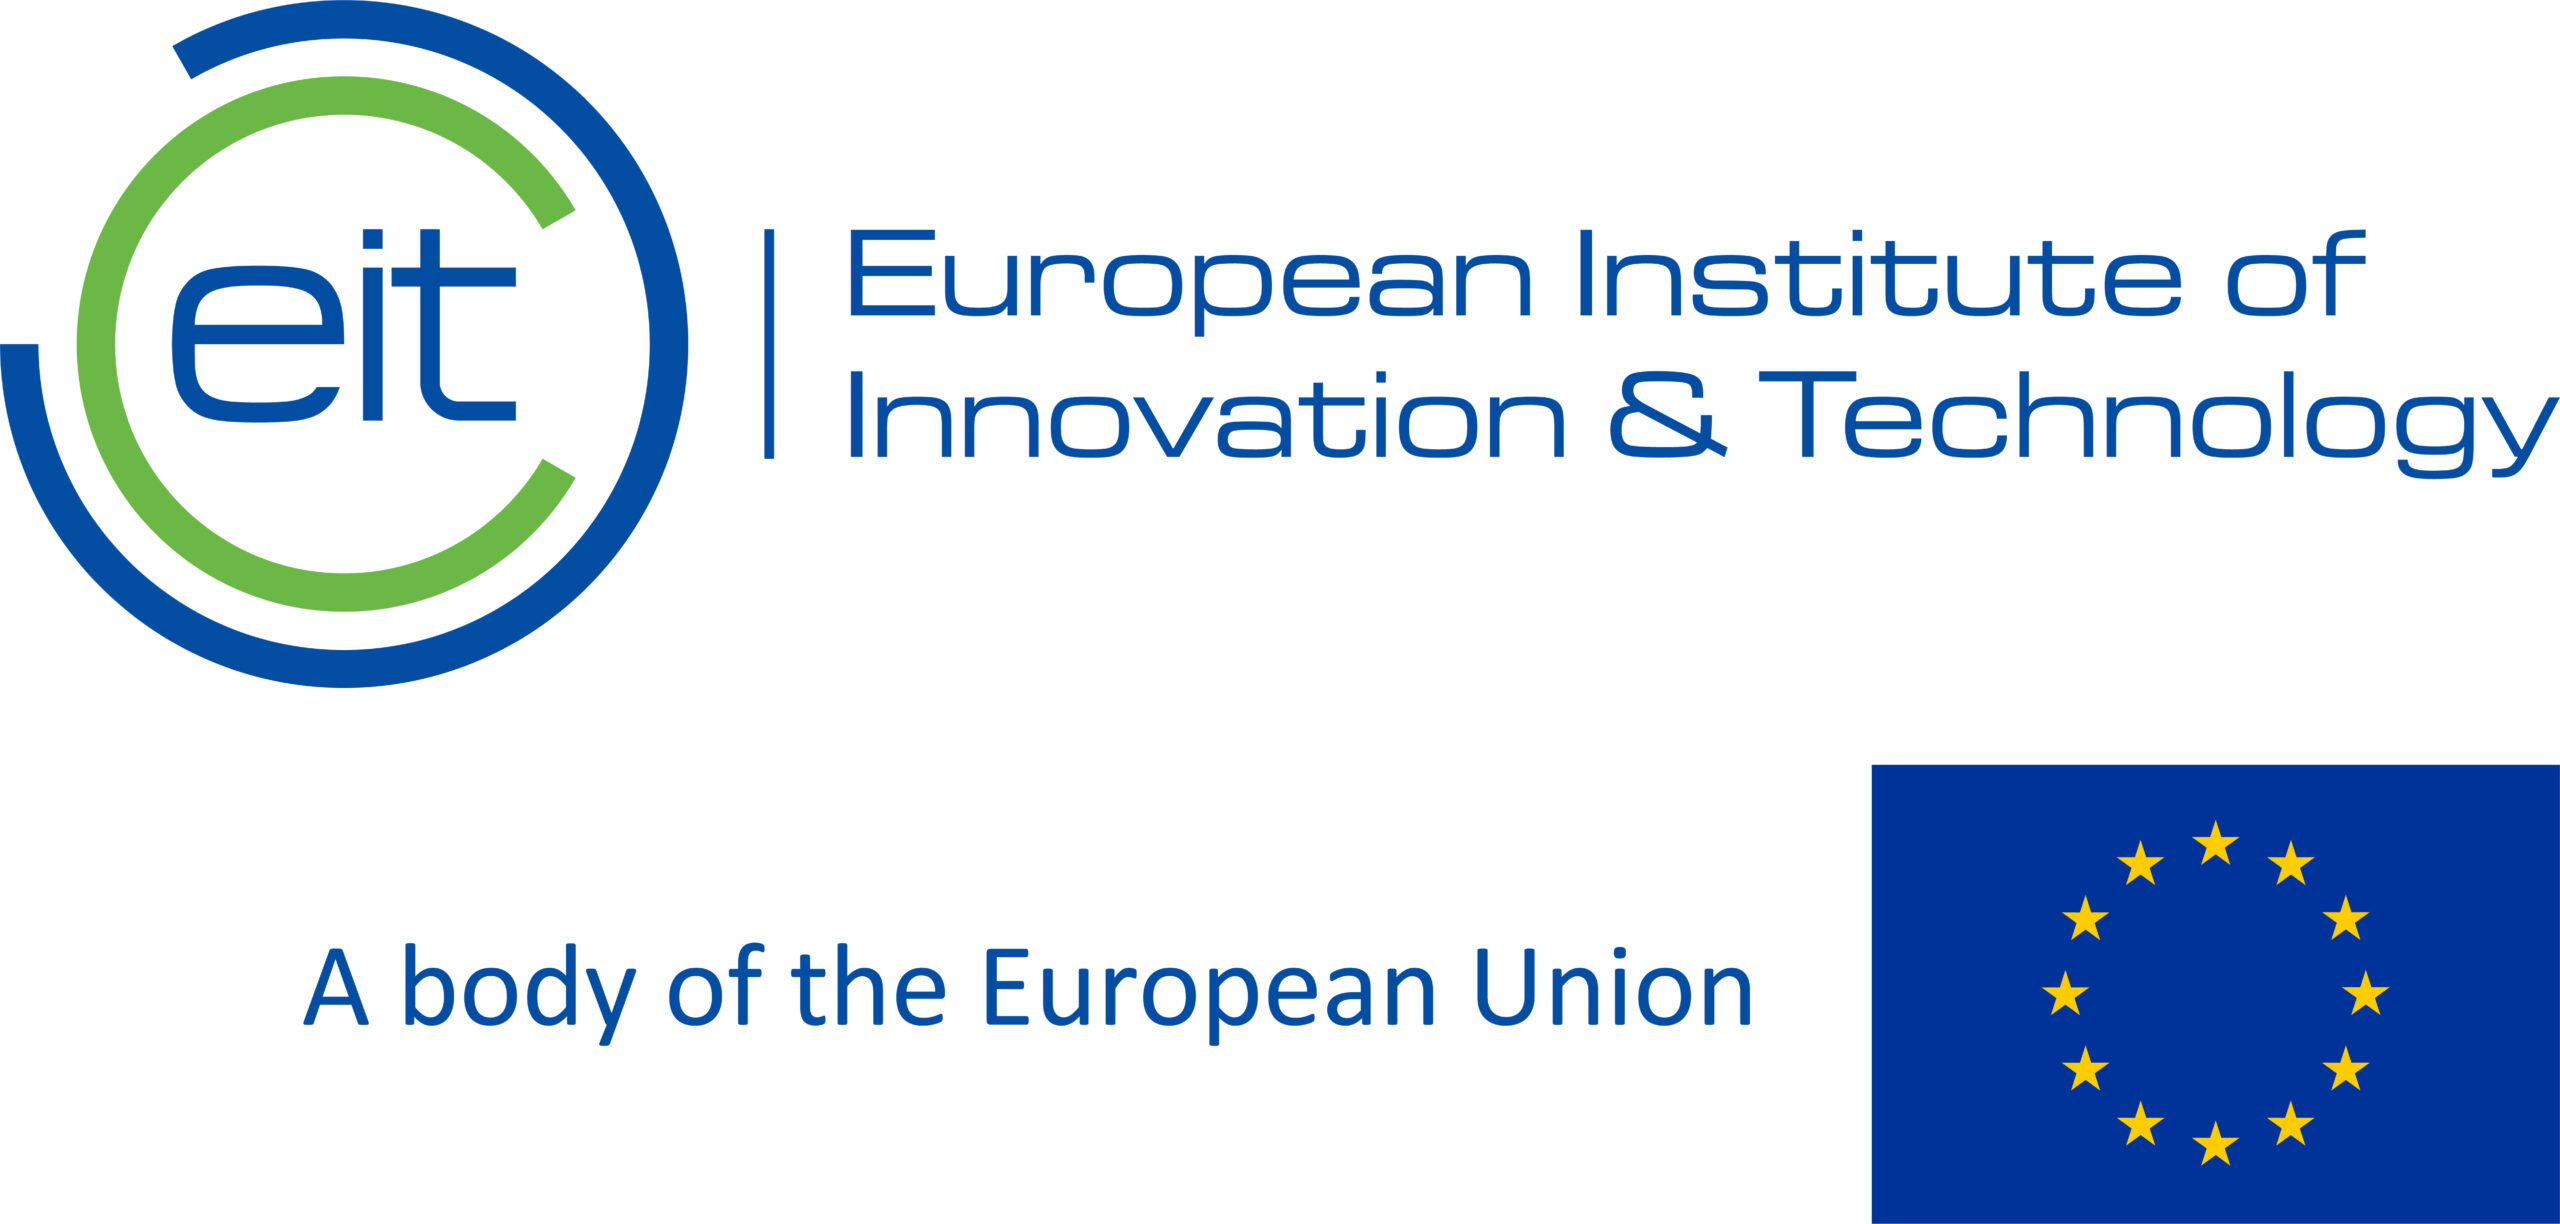 European Institute of Innovation and Technology (EIT)